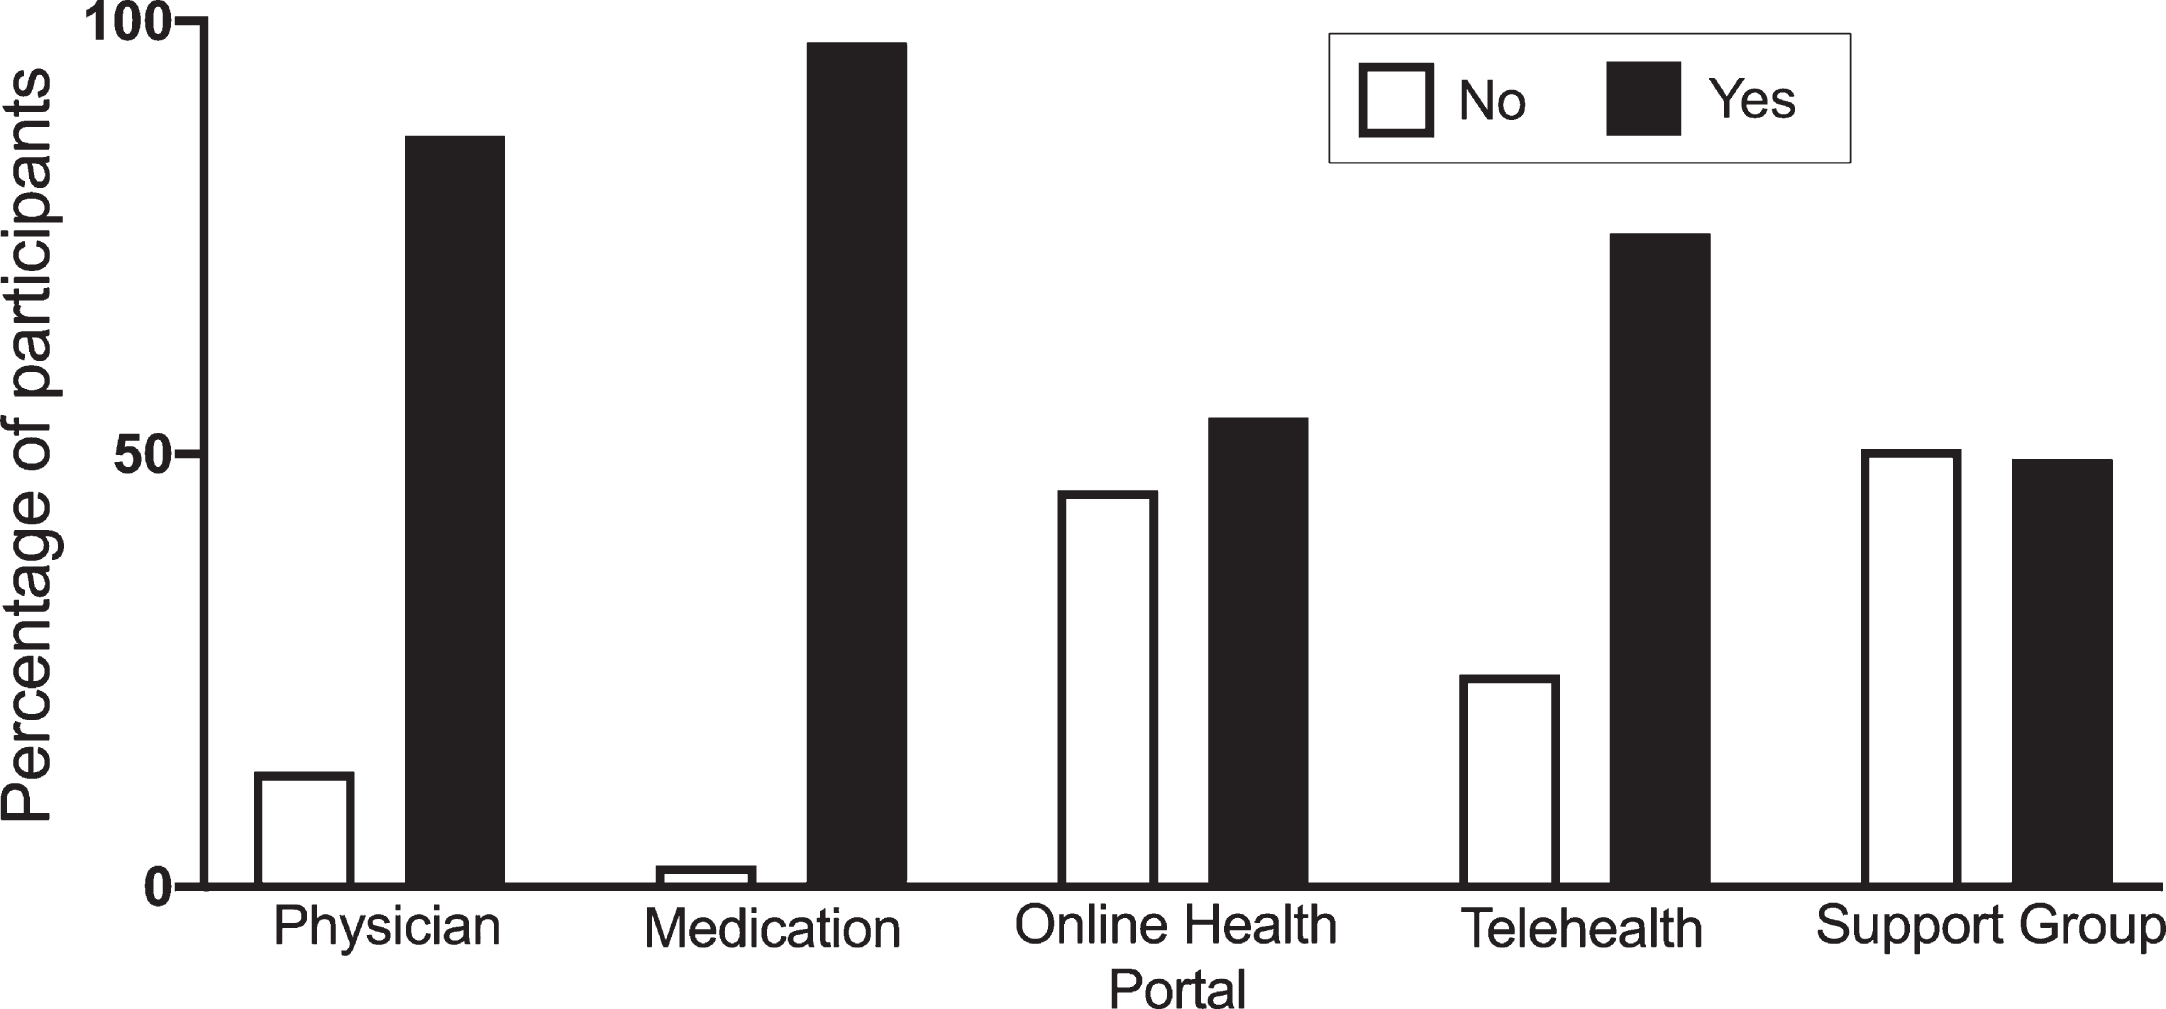 Feasibility of remote healthcare delivery in HD patients. Participants were asked about their ability to see a physician (Physician), obtain medication (Medication), communicate with medical providers using online health platform (Online Health Portal), ability to participate in telehealth visits (Telehealth) and online support groups (Support group). Data is shown as percentage of all participants endorsing yes or no.